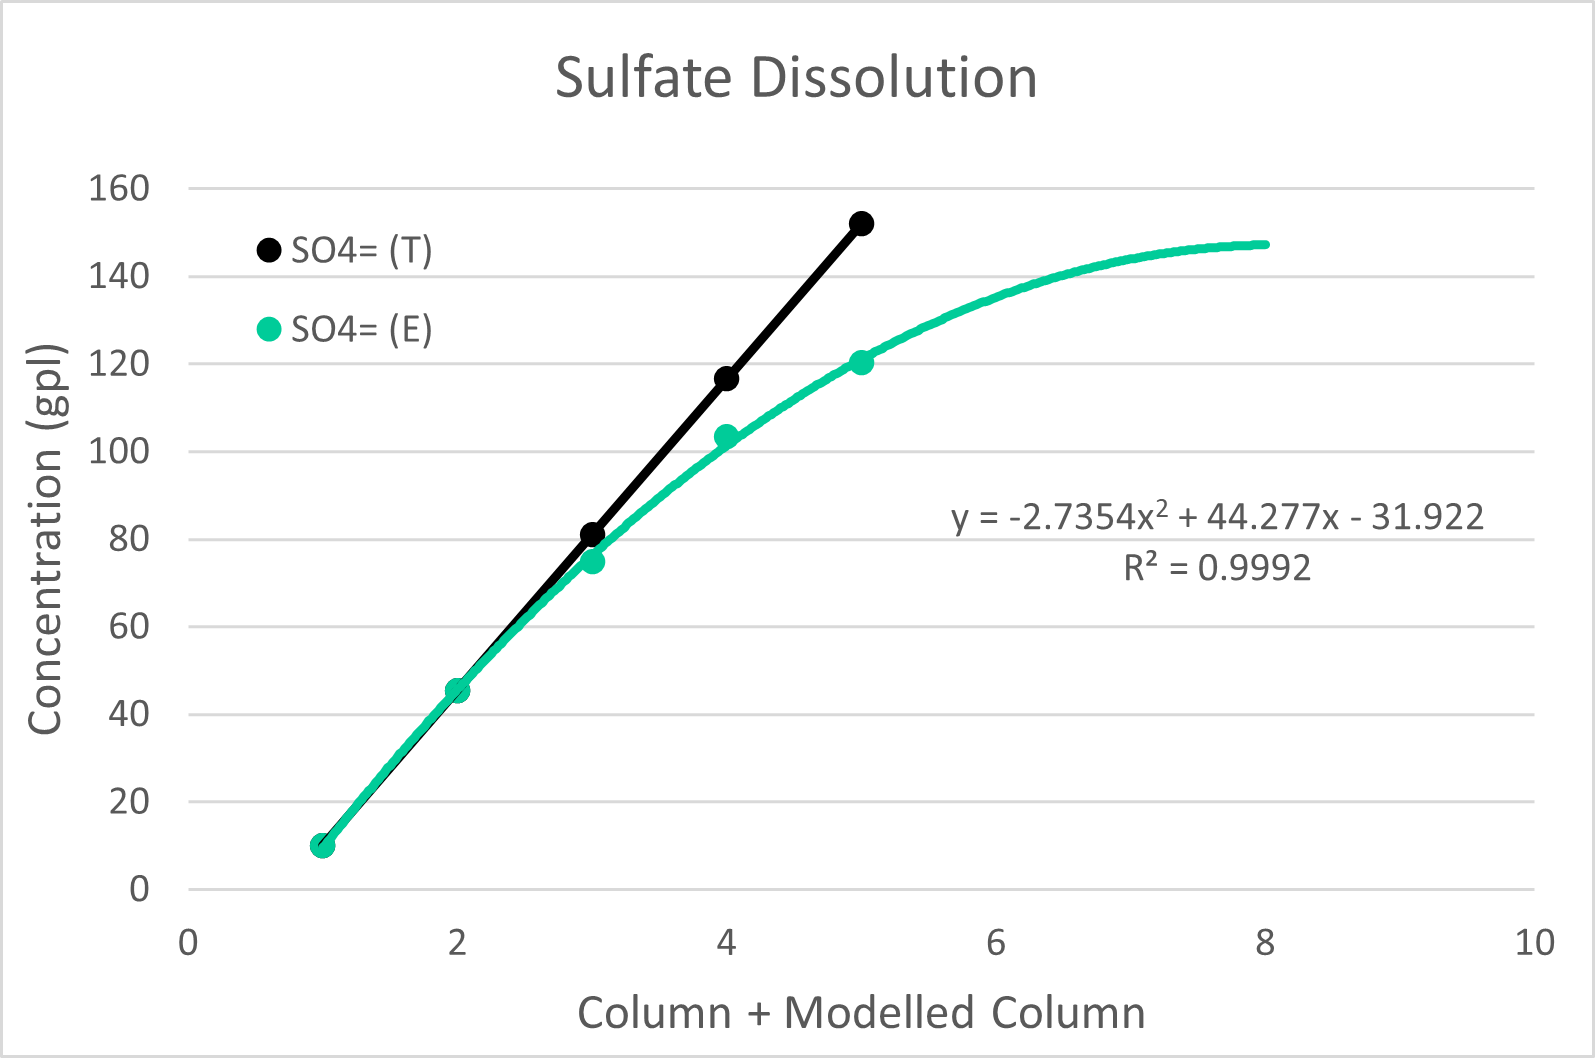 Evolution of Sulfate Concentration in PLS solution